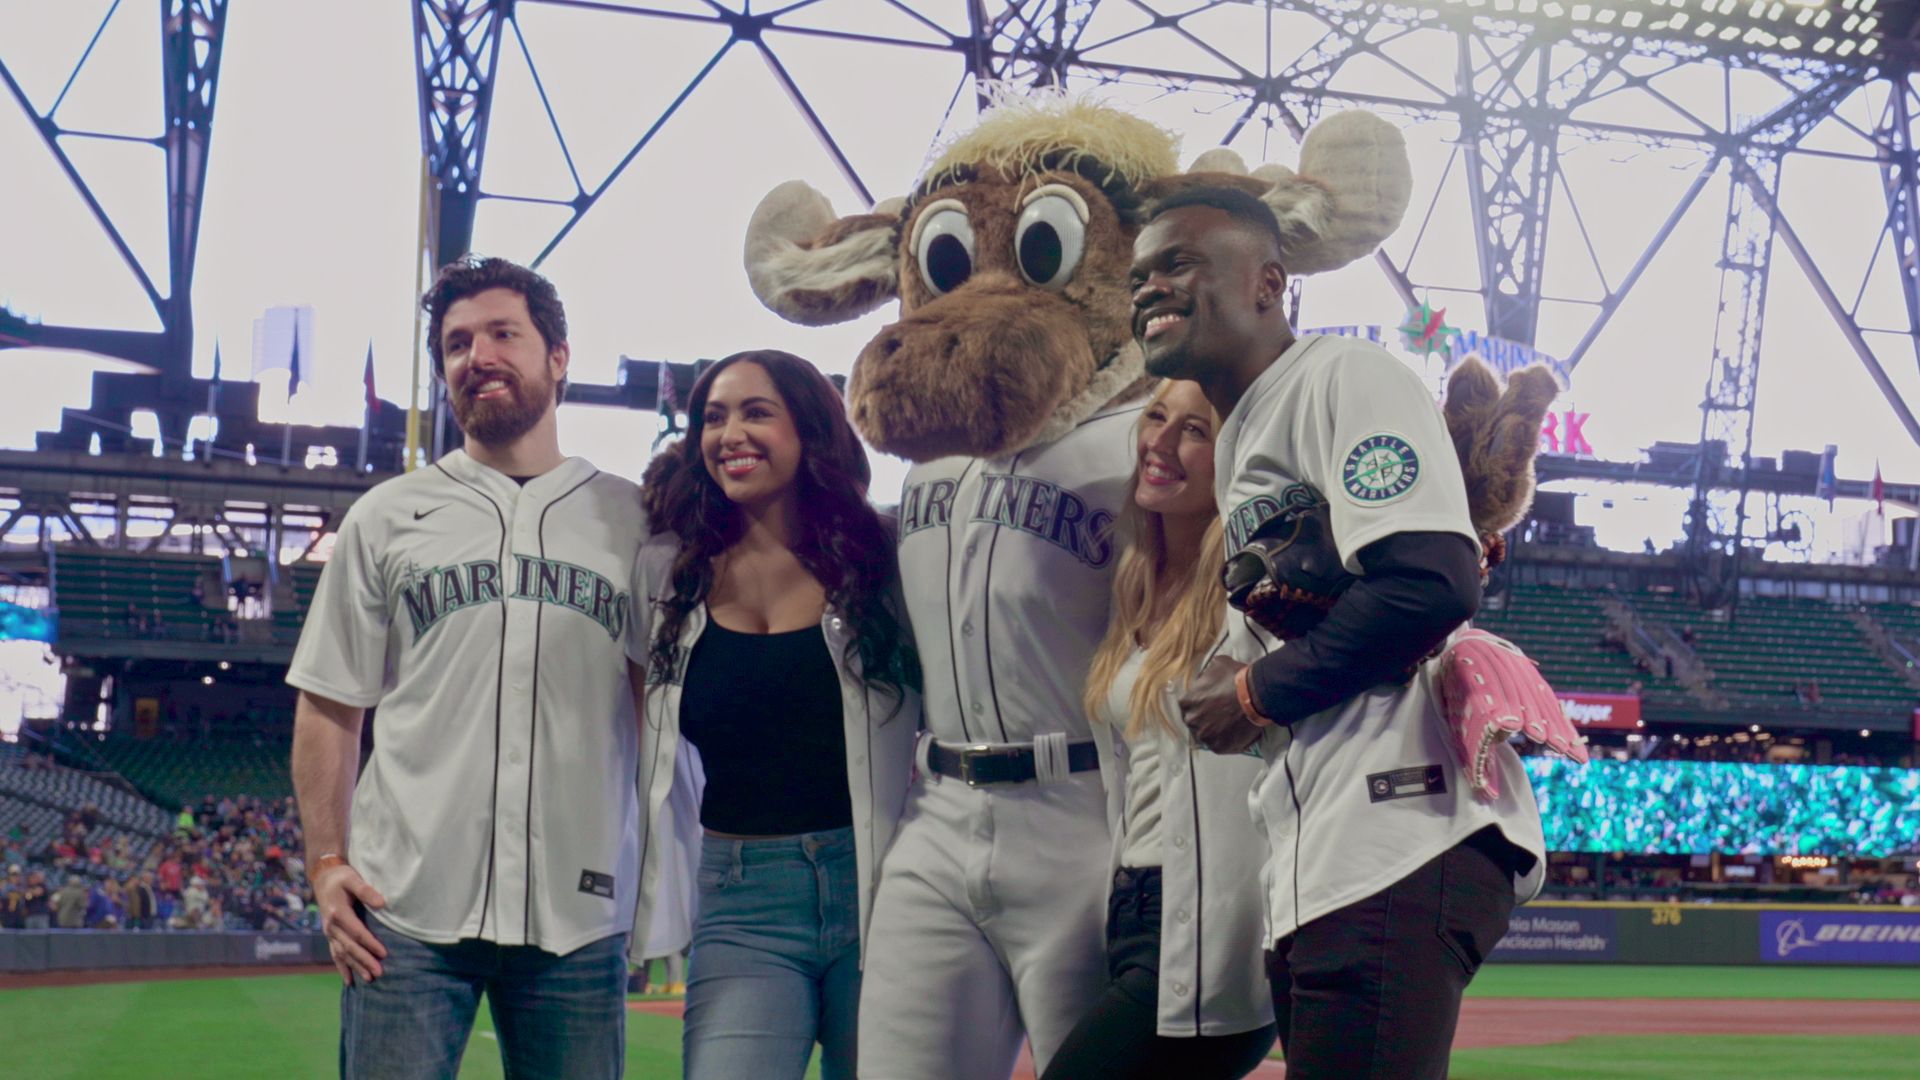 Two couples from "Love Is Blind" season 4 cast at a Seattle Mariners game posing with the Mariners mascot..